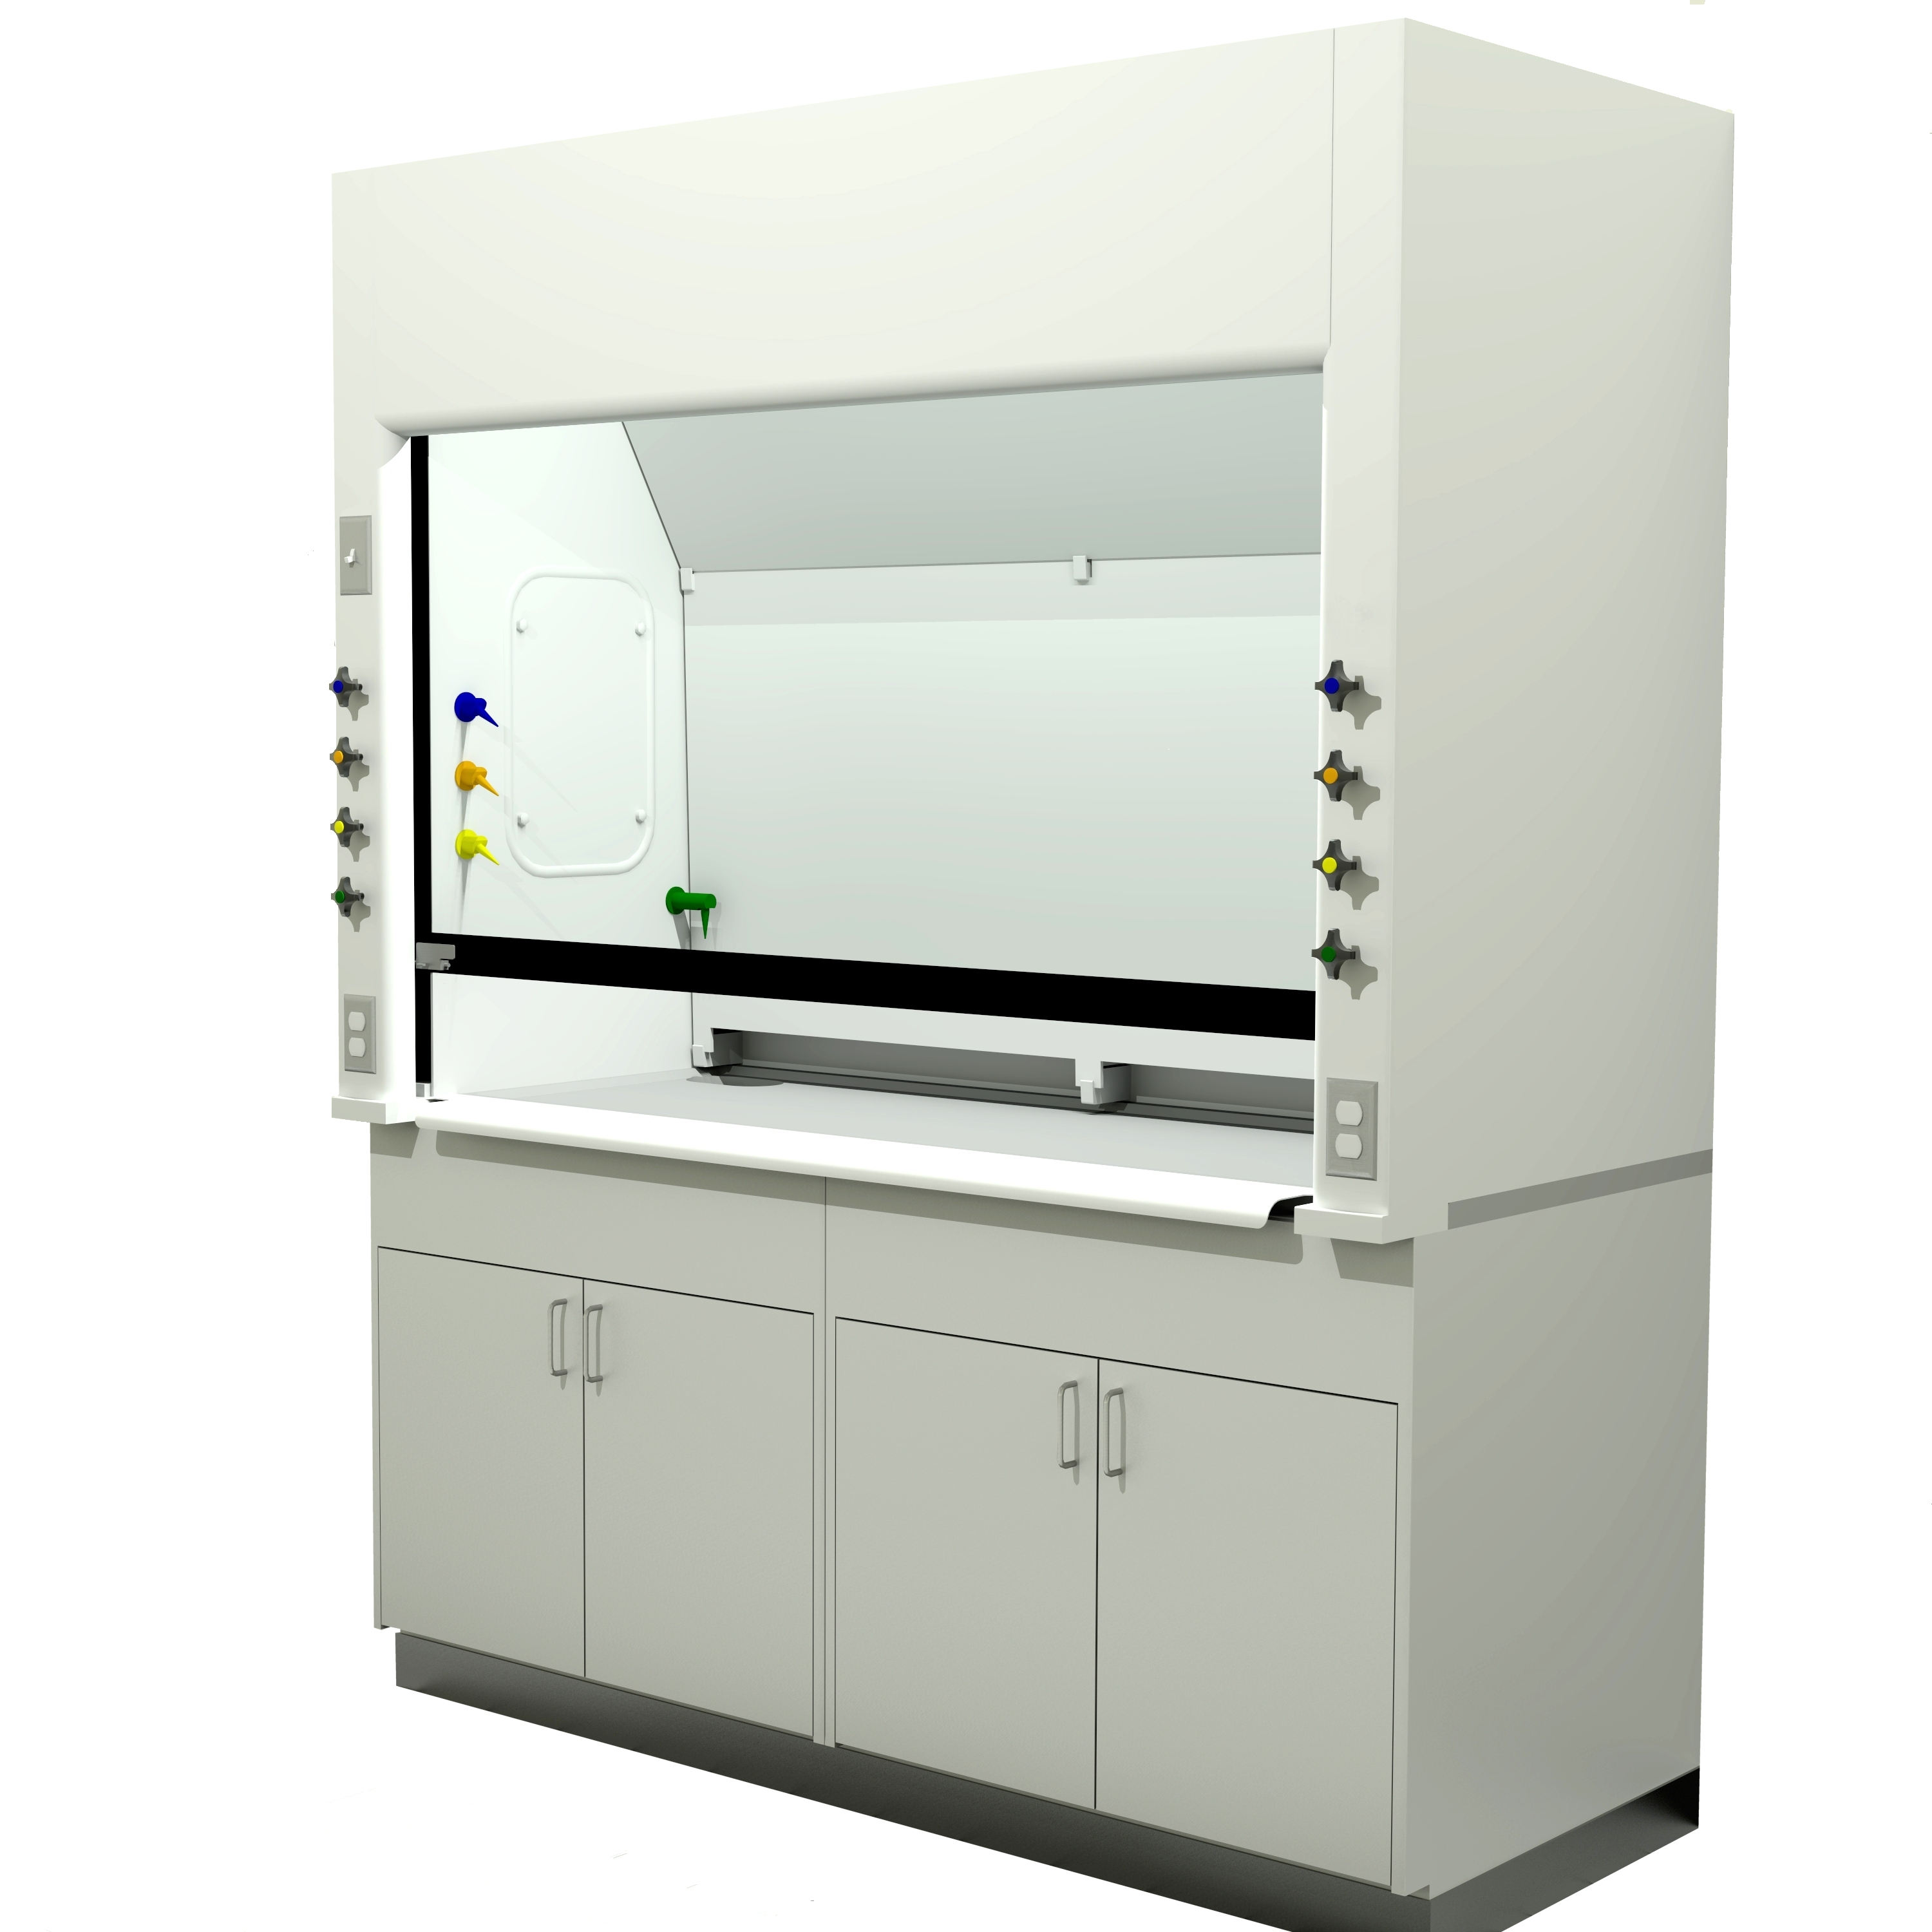 Hamilton Scientific Introduces Mistral, the Next Generation in Fume Hoods